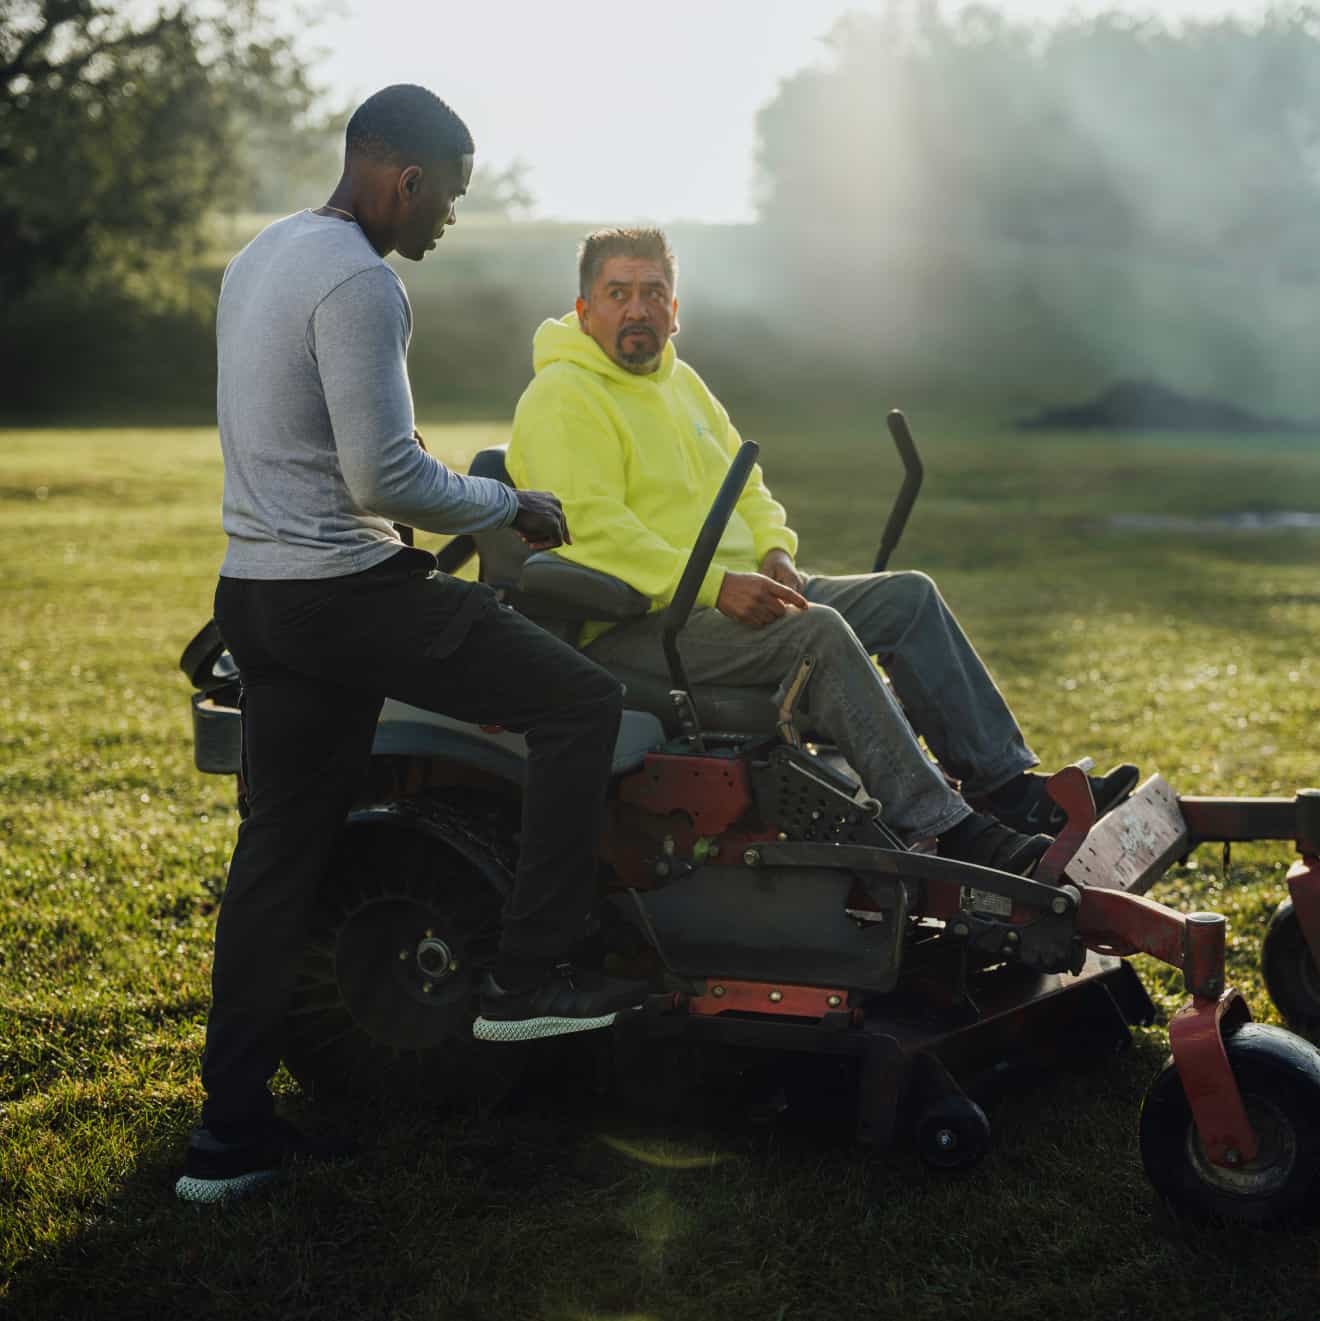 A landscaping business owner speaks to his employee who is operating a lawn mower.